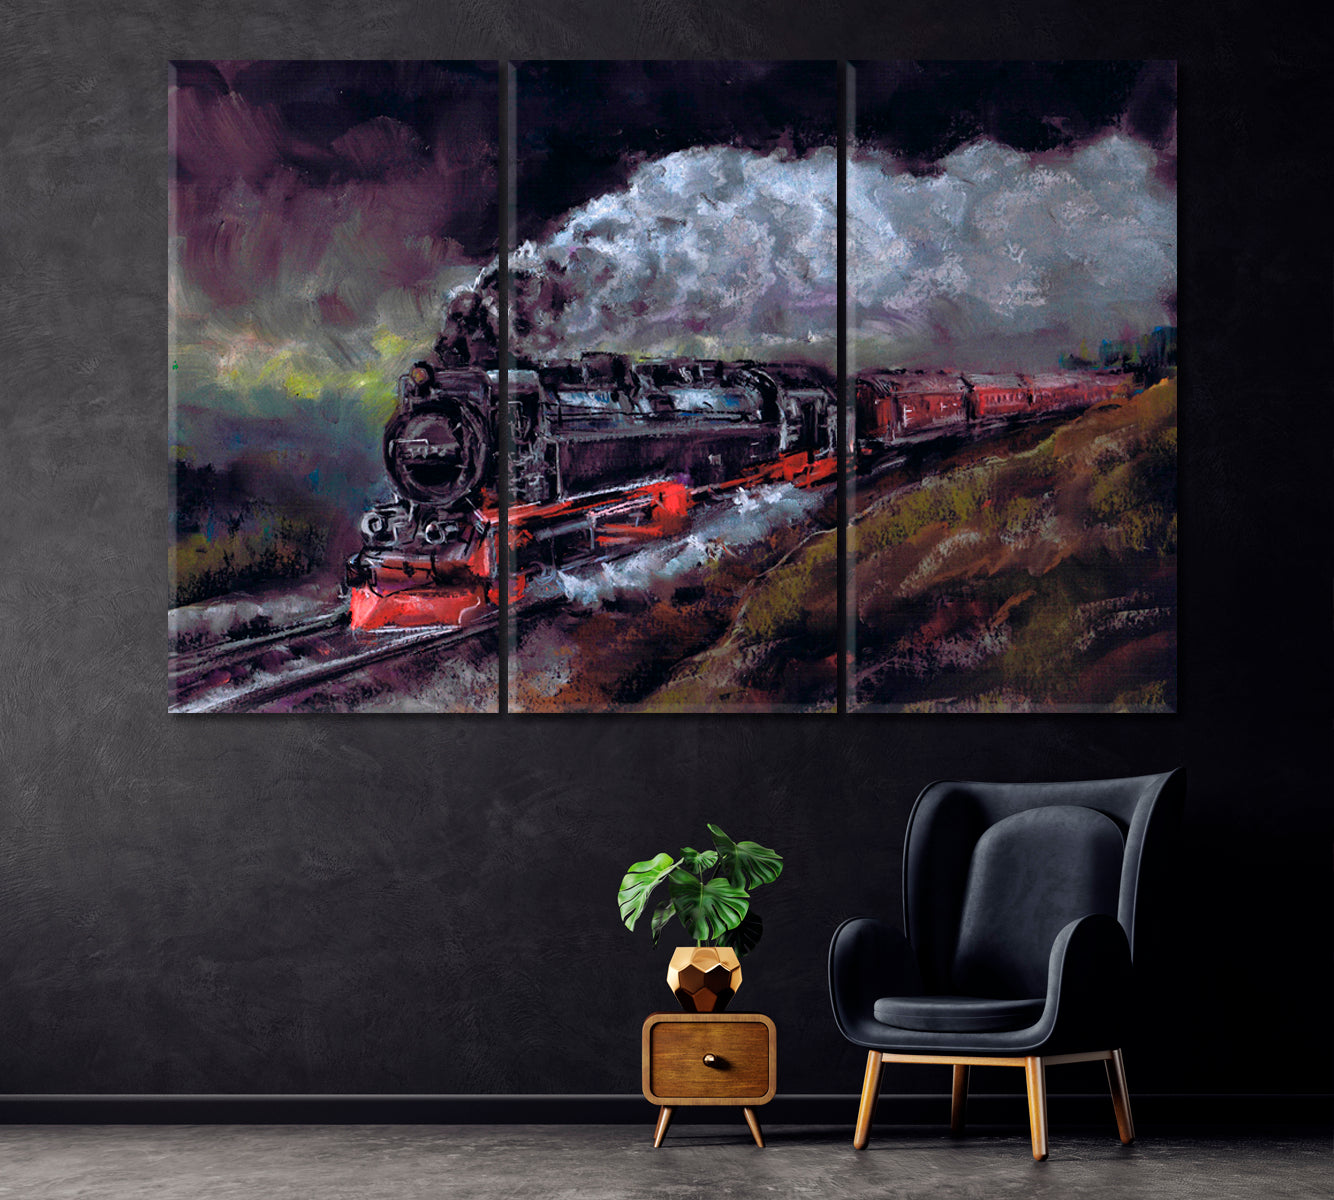 Steam Locomotive at Night Canvas Print ArtLexy 3 Panels 36"x24" inches 